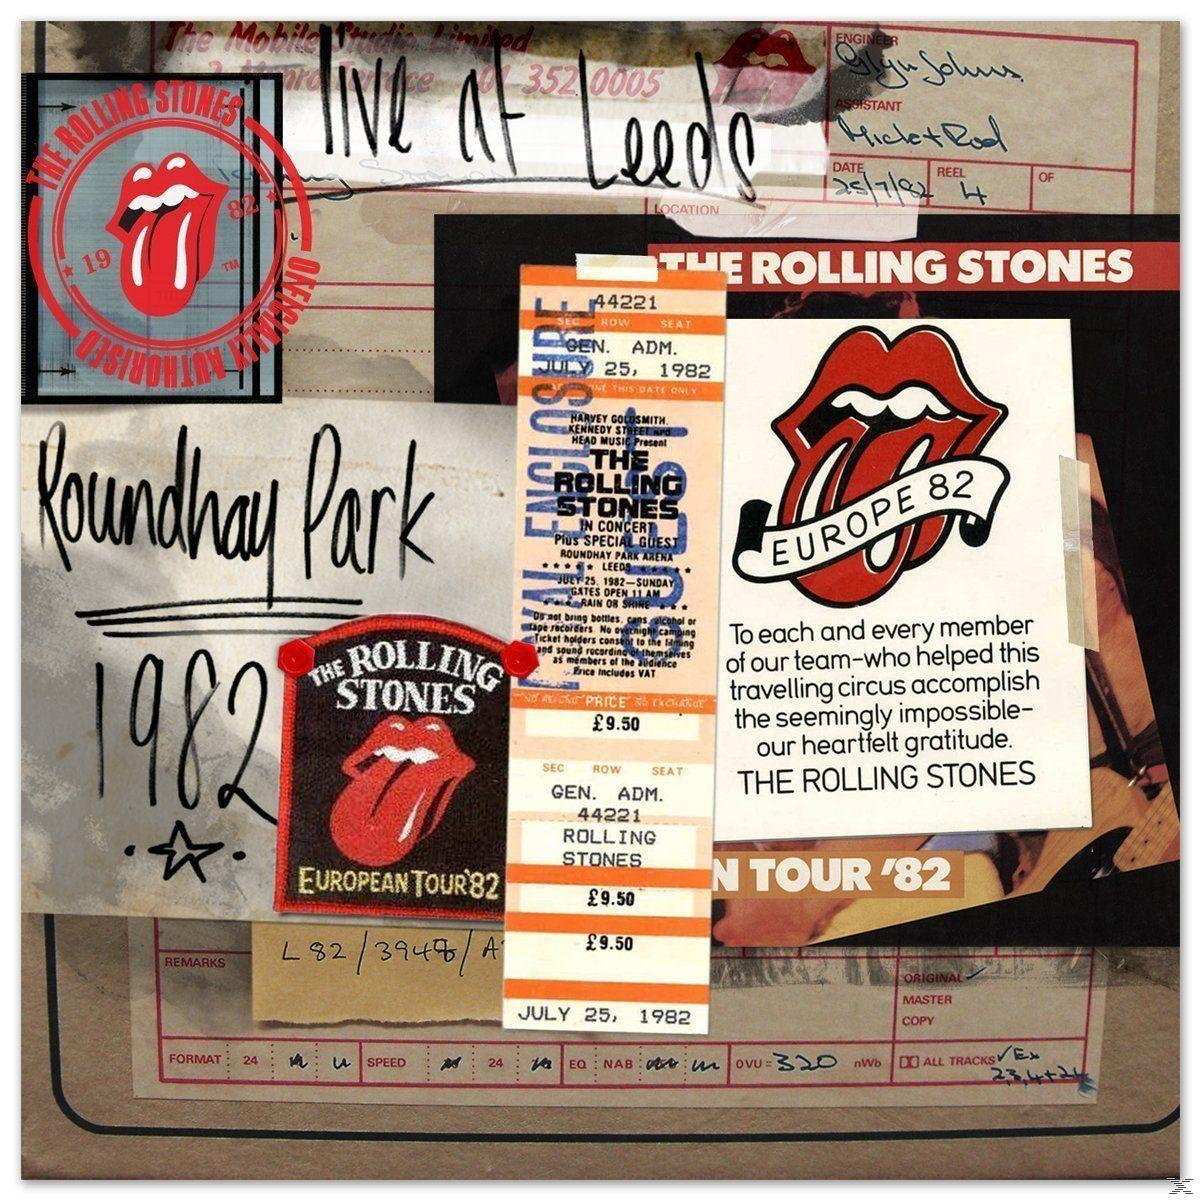 The Rolling Stones - - Leeds 1982 From Vault-Live In (Blu-ray) The